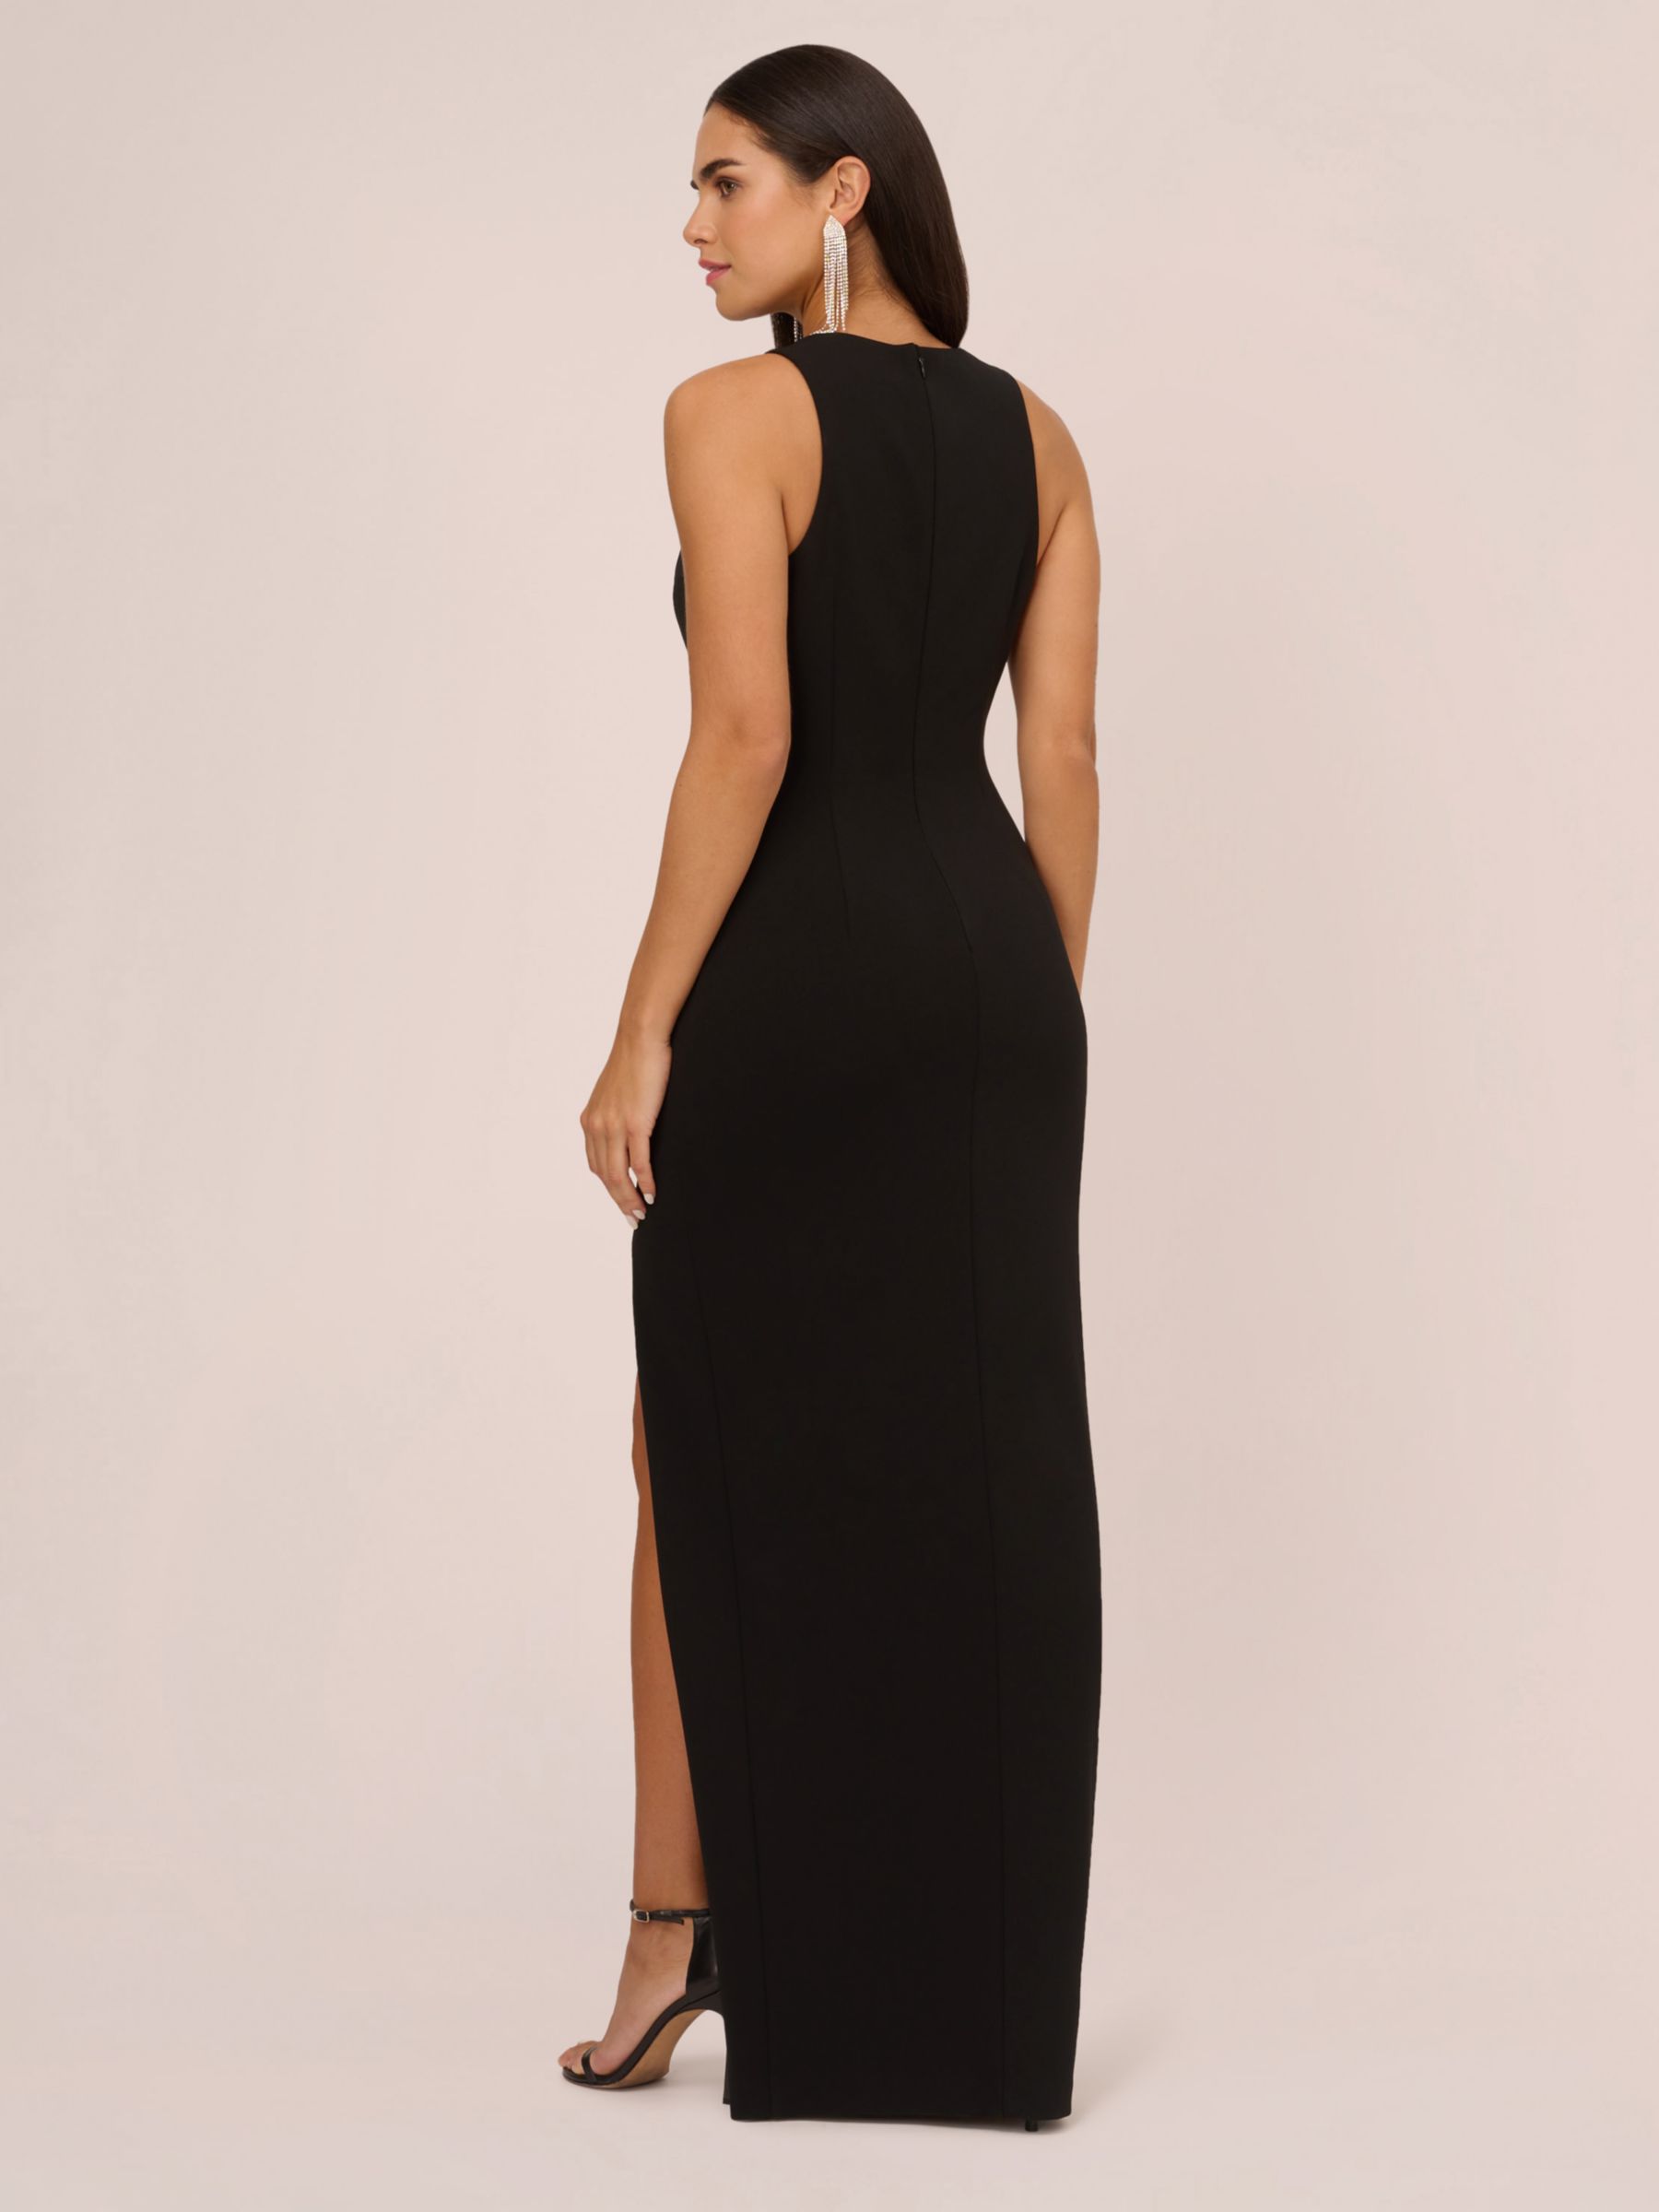 Buy Adrianna Papell Aidan by Adrianna Papell Sleeveless Knit Crepe Gown, Black Online at johnlewis.com